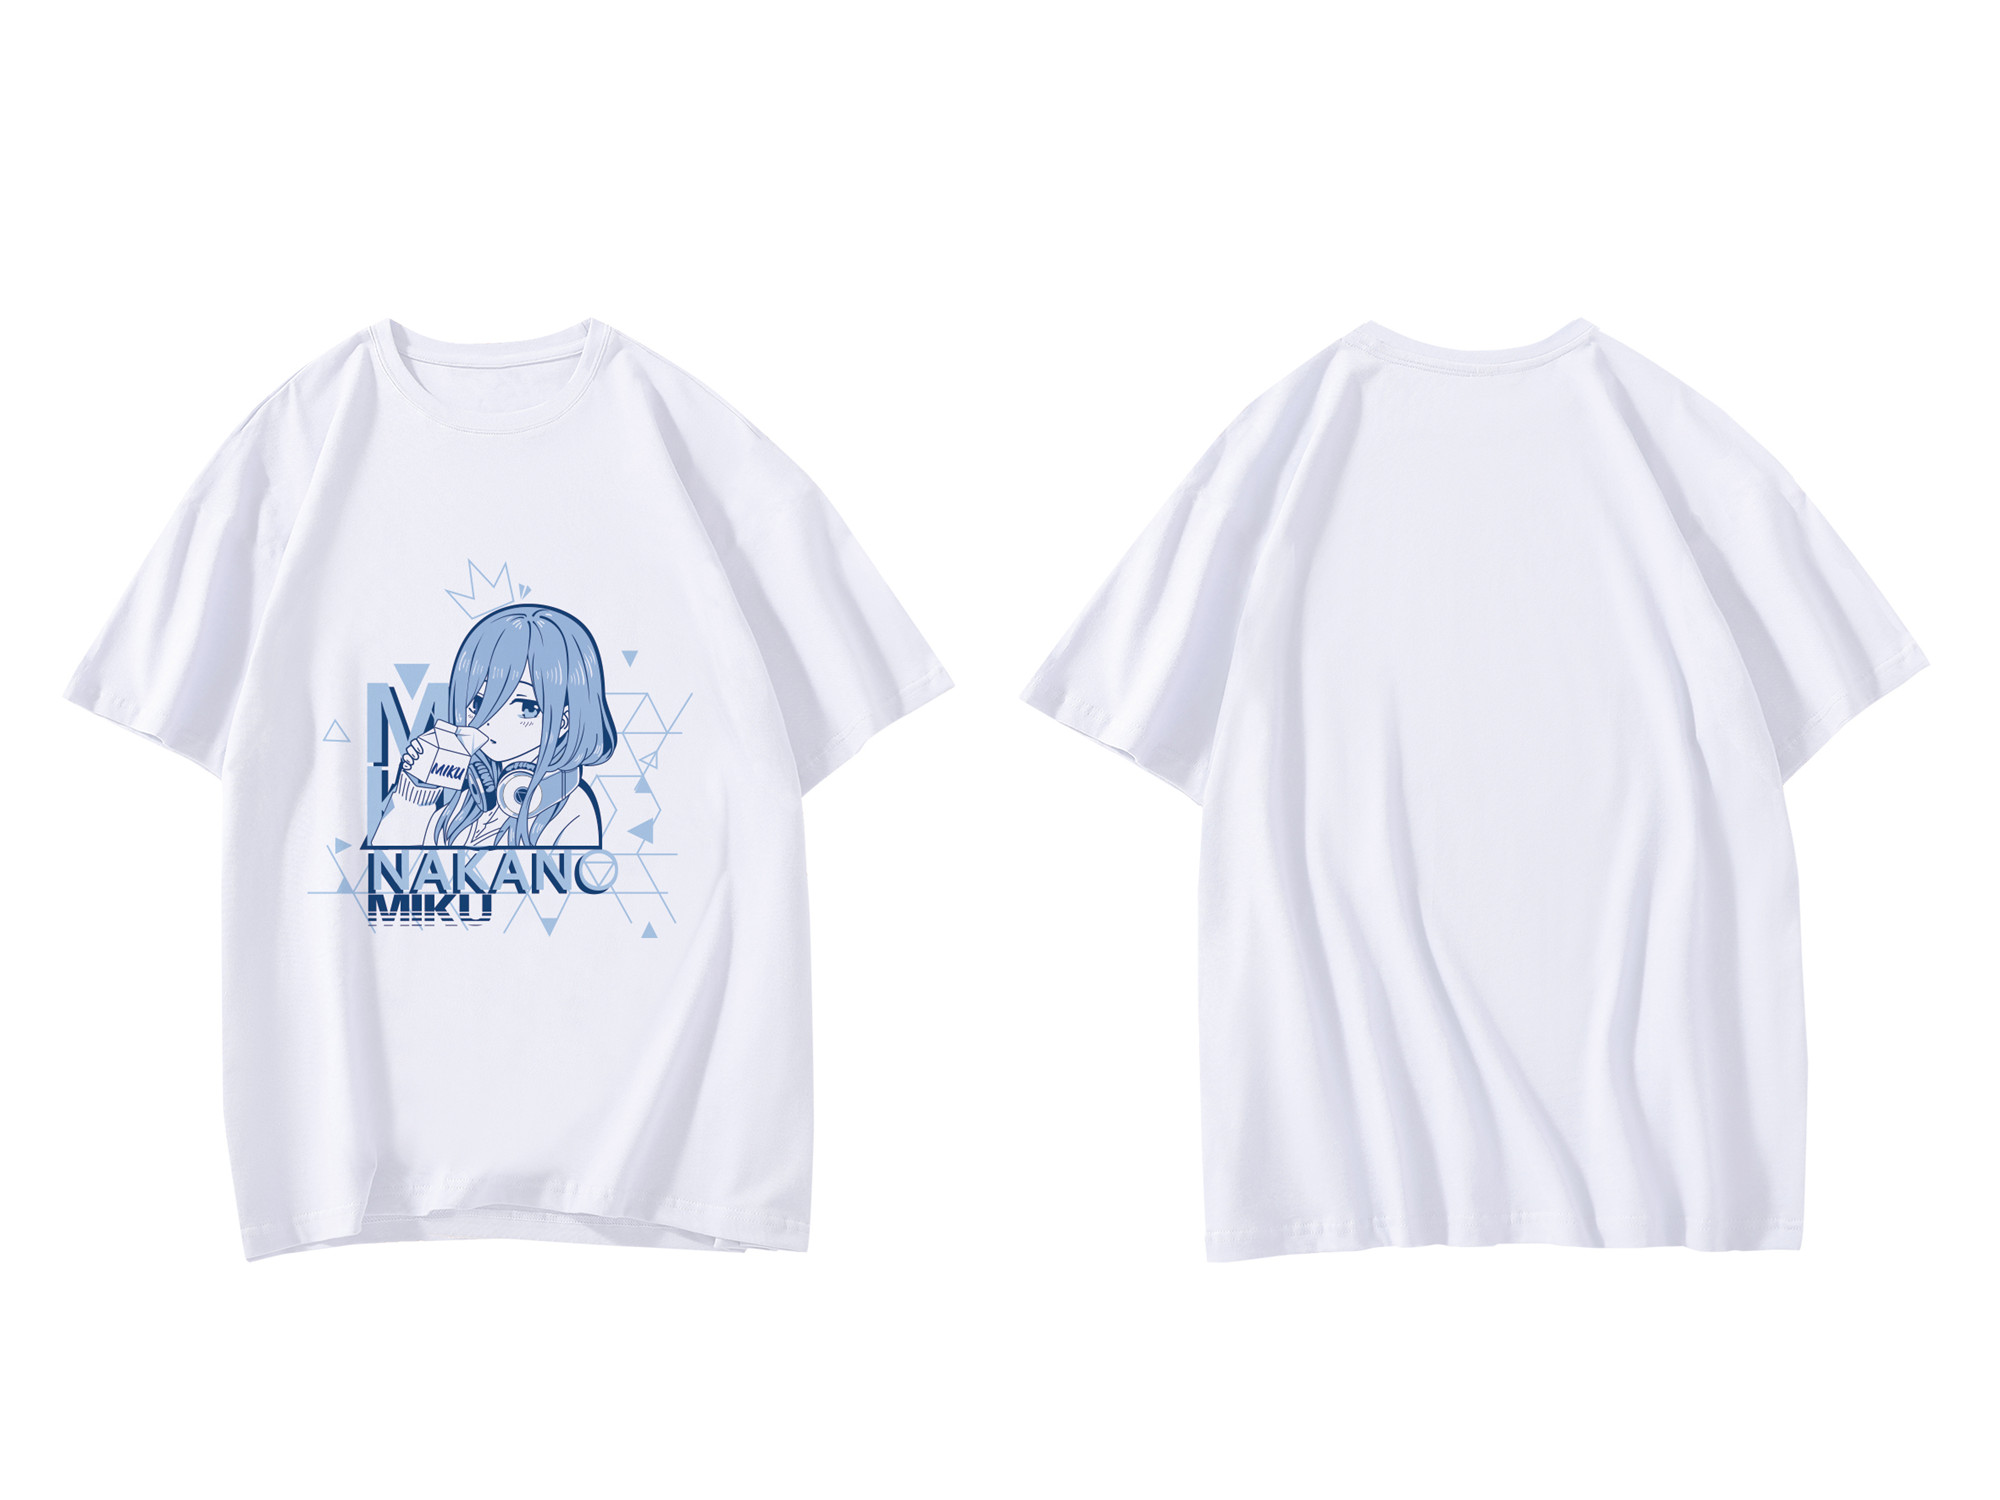 Nakano Miku The Quintessential Quintuplets Unisex Anime Mens/Womens Short Sleeve T-shirts Fashion Printed Tops Cosplay Costume